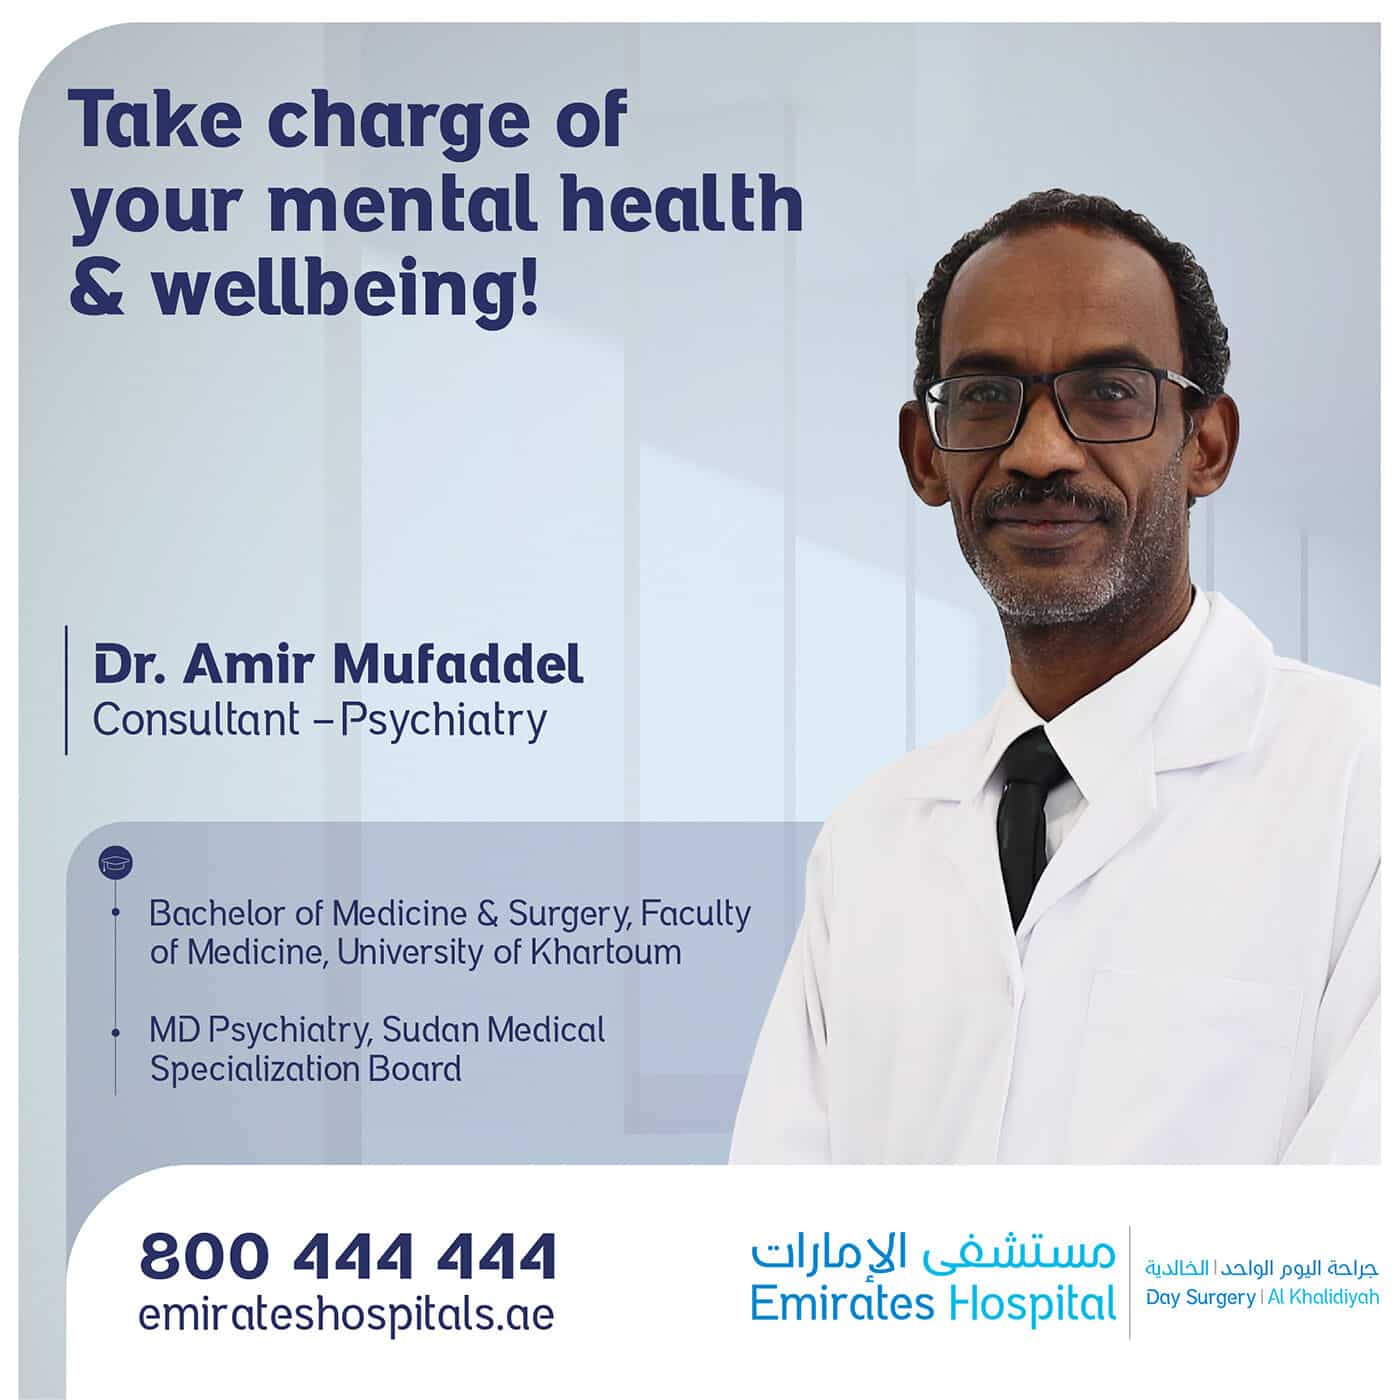 Dr. Amir Mufaddel, Consultant – Psychiatry Joined Emirates Hospital Day Surgery, Abu Dhabi